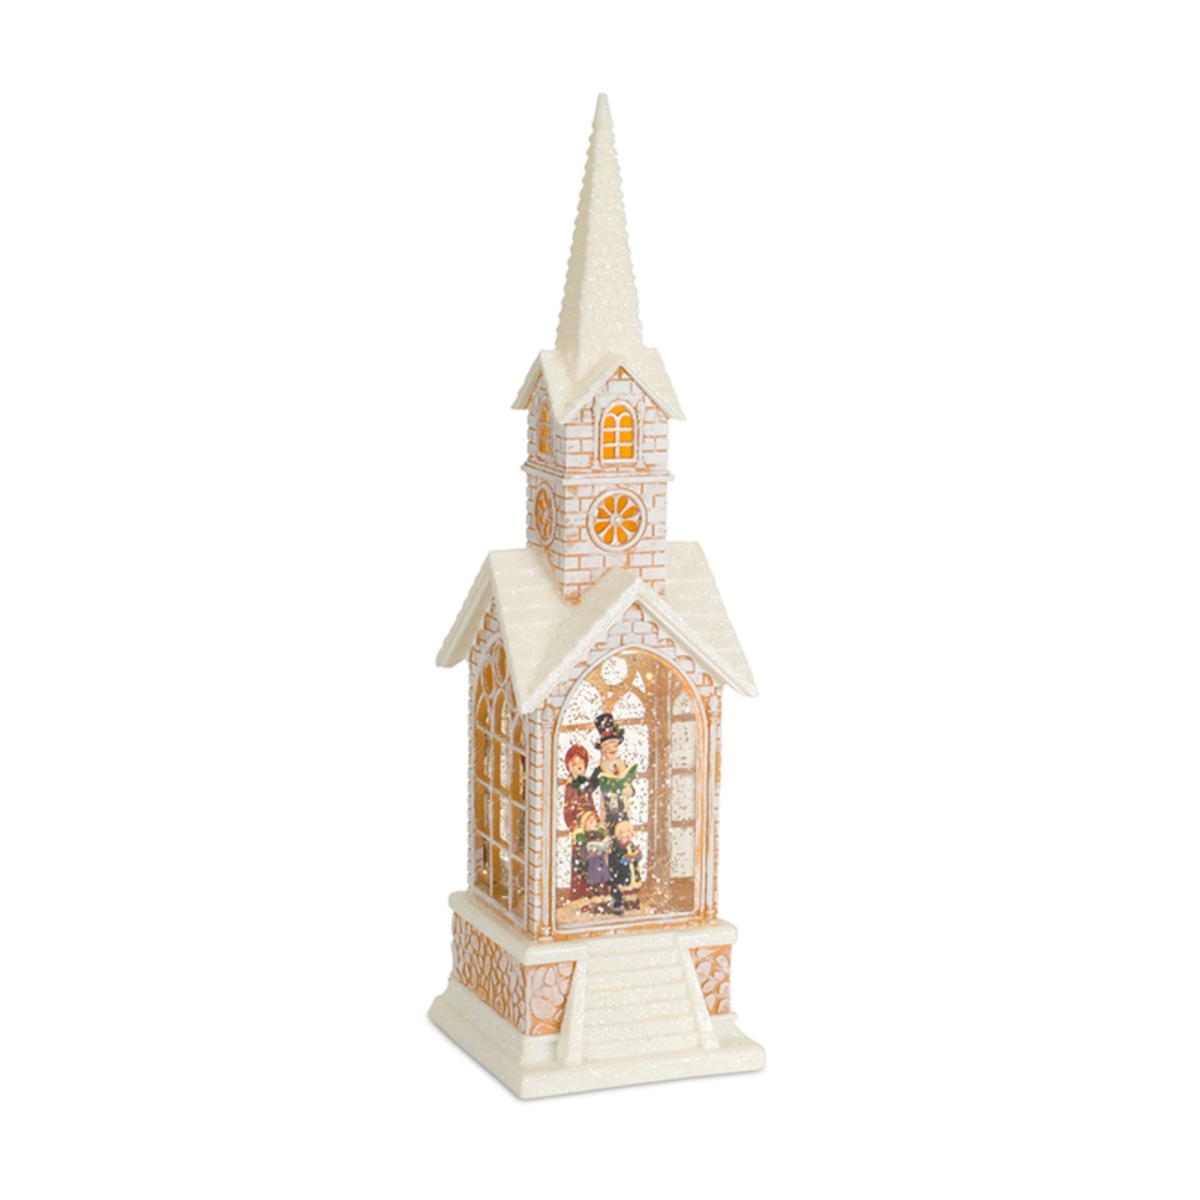 72826ds 16.25 In. Church Snow Globe With Carolers Plastic - White & Brown